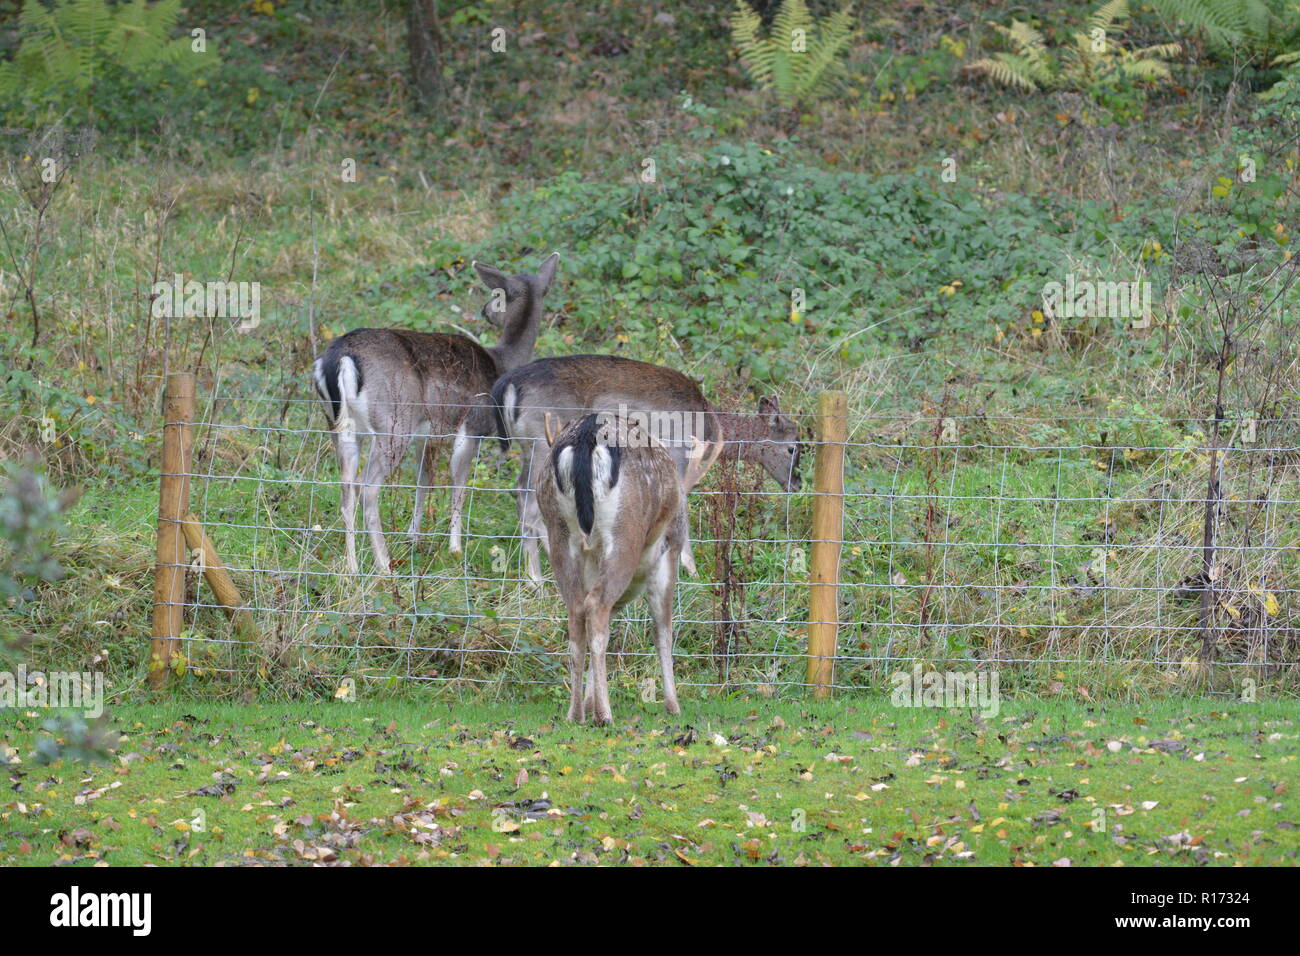 Young Sika deer standing in a group in a clearing close to stock fence and wooden posts The Doward South Herefordshire England UK Stock Photo